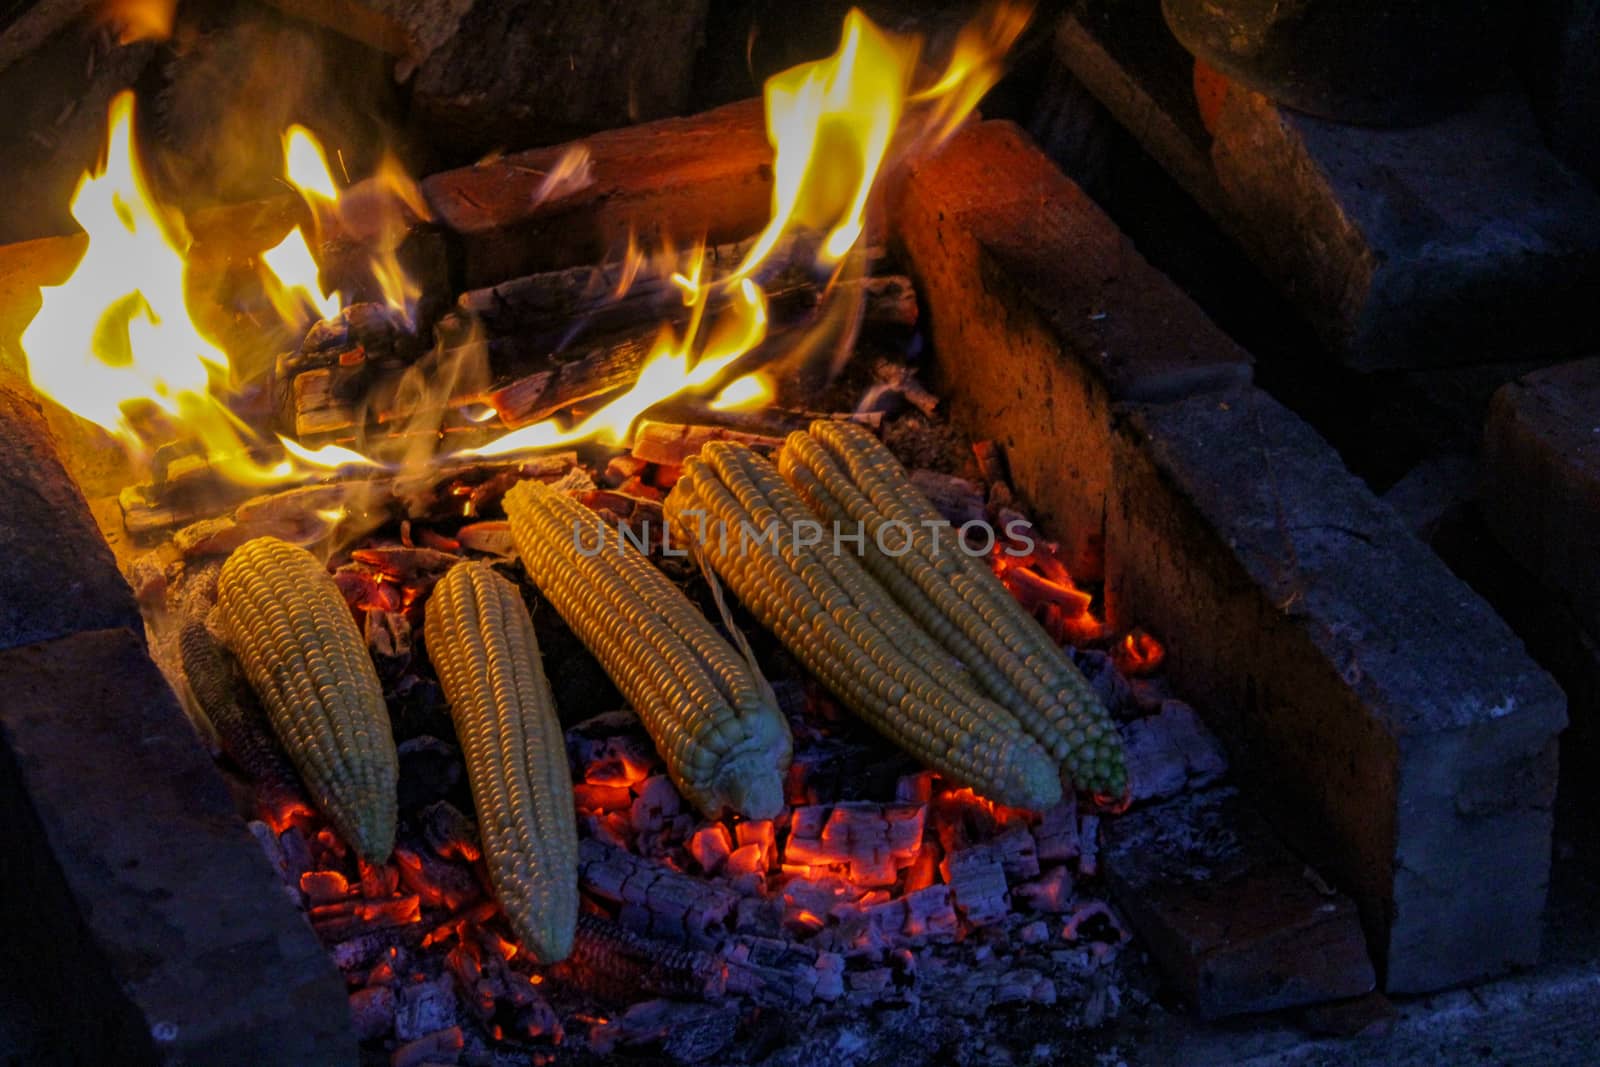 Five corns. Freshly harvested corn is grilled with a little fire and smoke in the background. Traditional way of roasting corn in Bosnia. Zavidovici, Bosnia and Herzegovina.